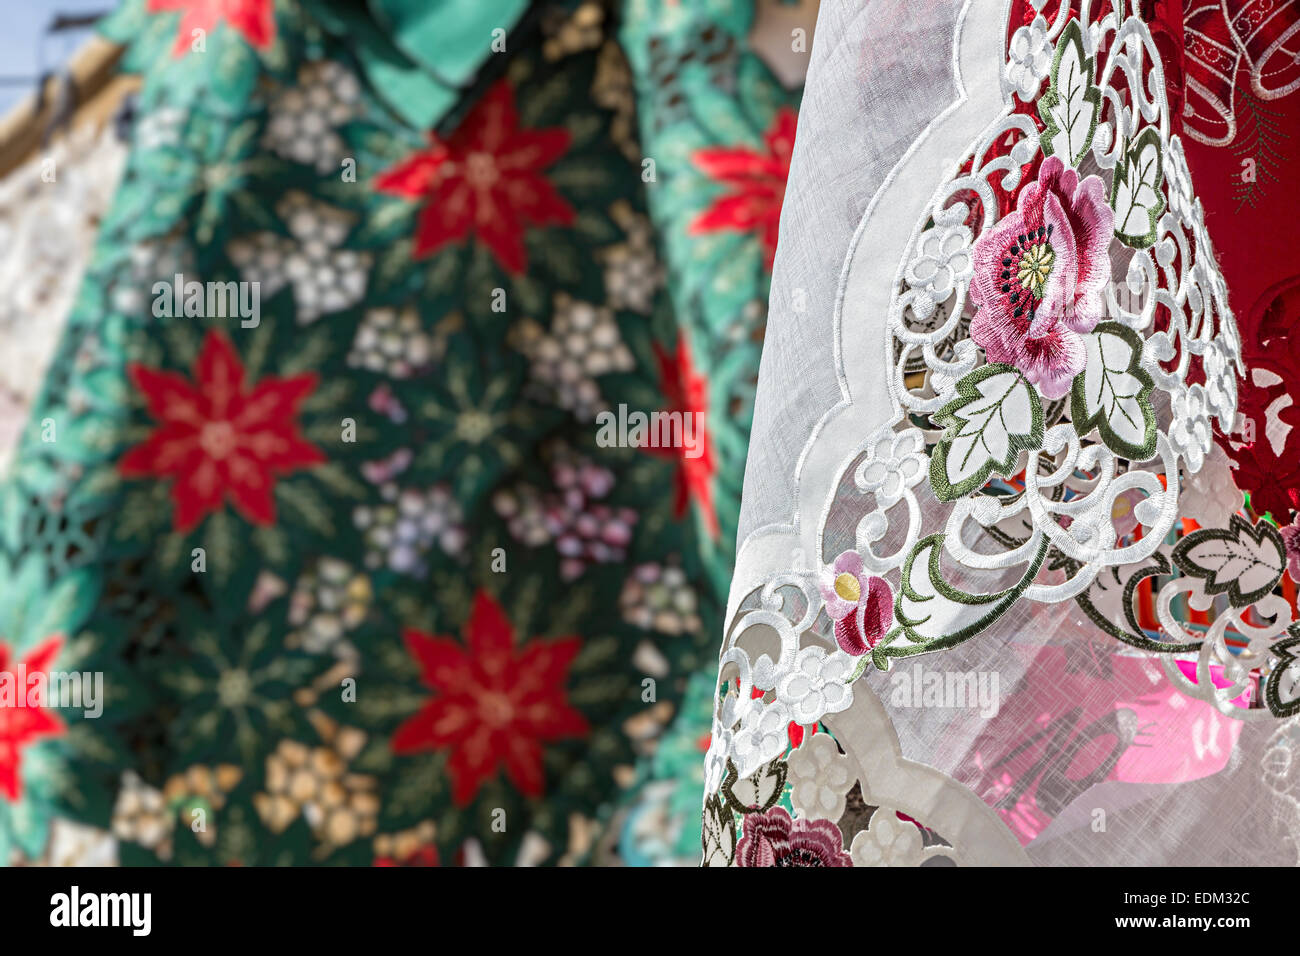 Embridered lace on sale in market, Teguise, Lanzarote, Canary Islands, Spain Stock Photo